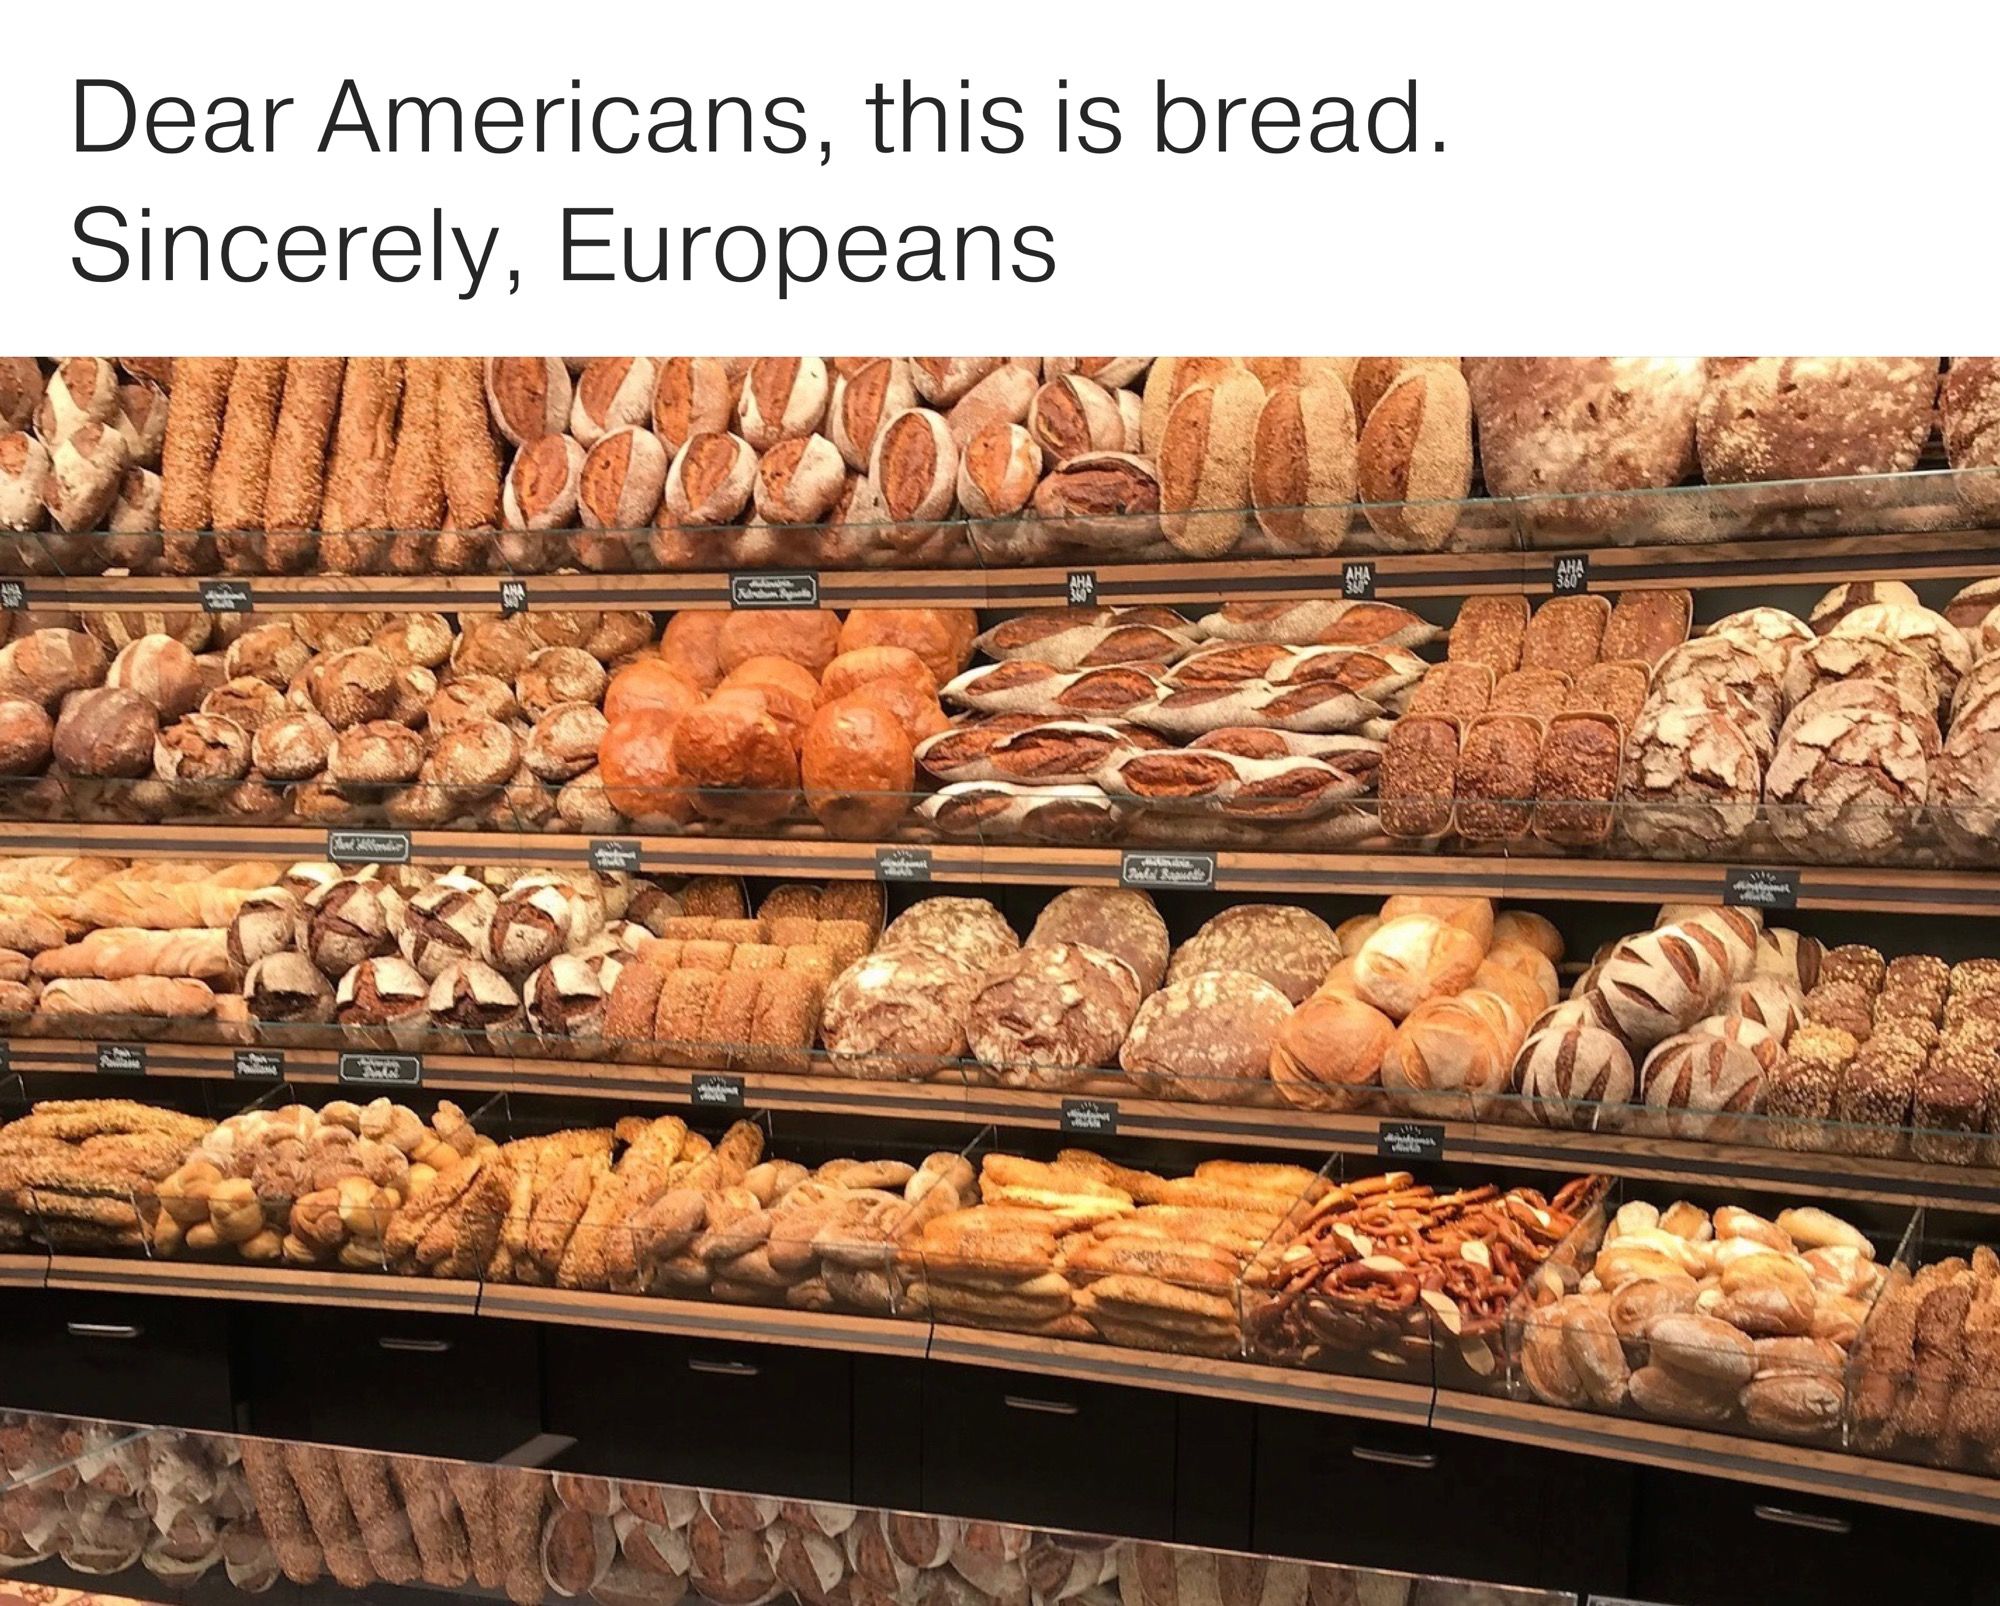 Real bread does not taste like a candy.